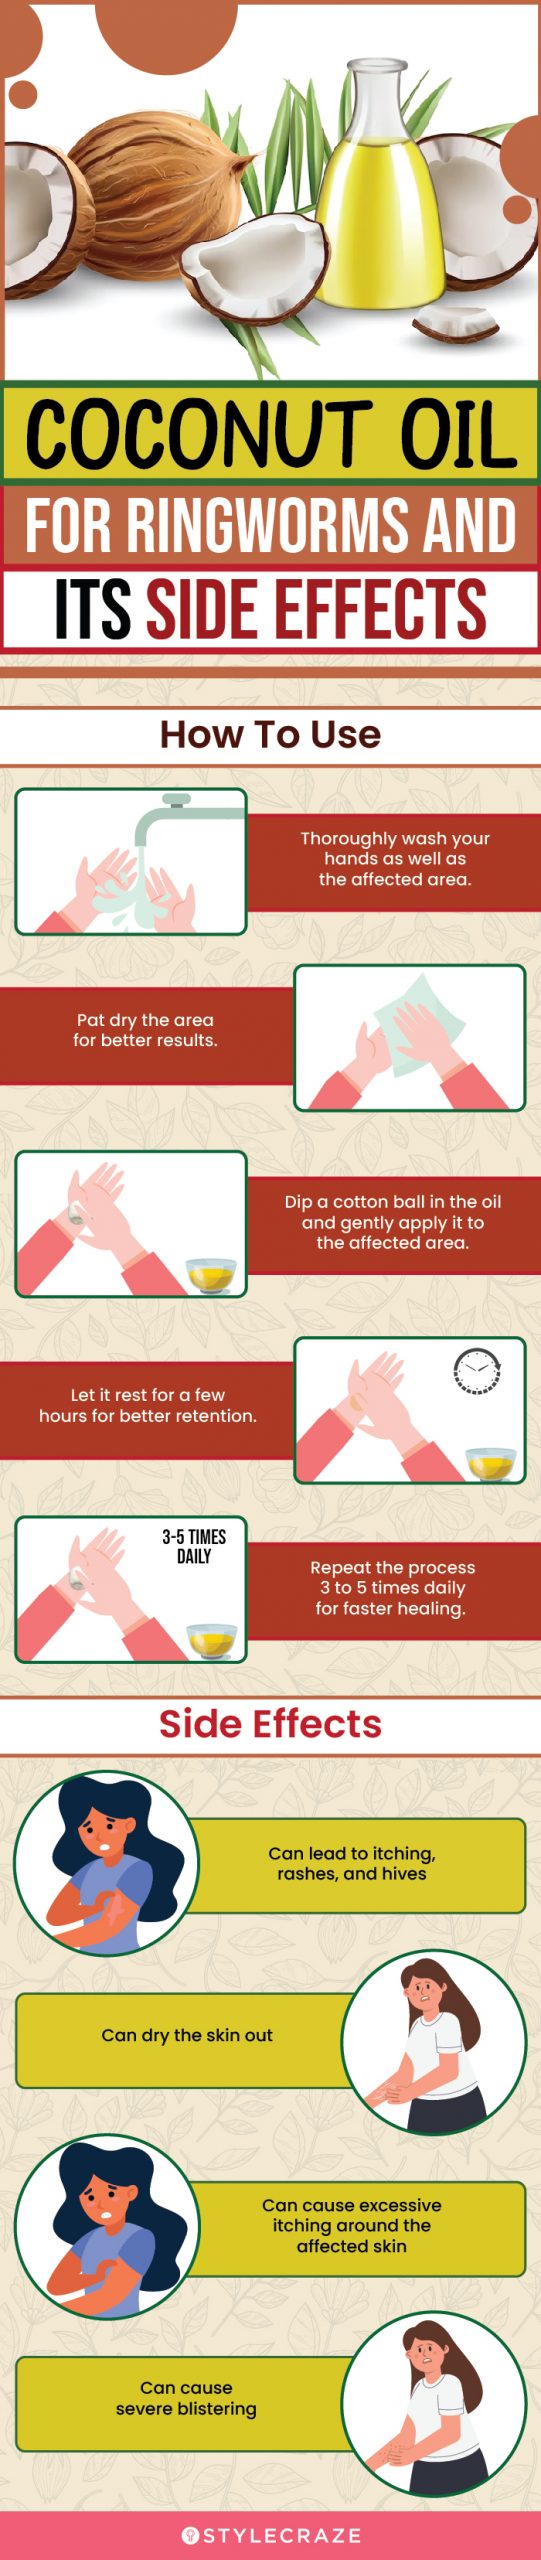 coconut oil for ringworms and its side effects (infographic)